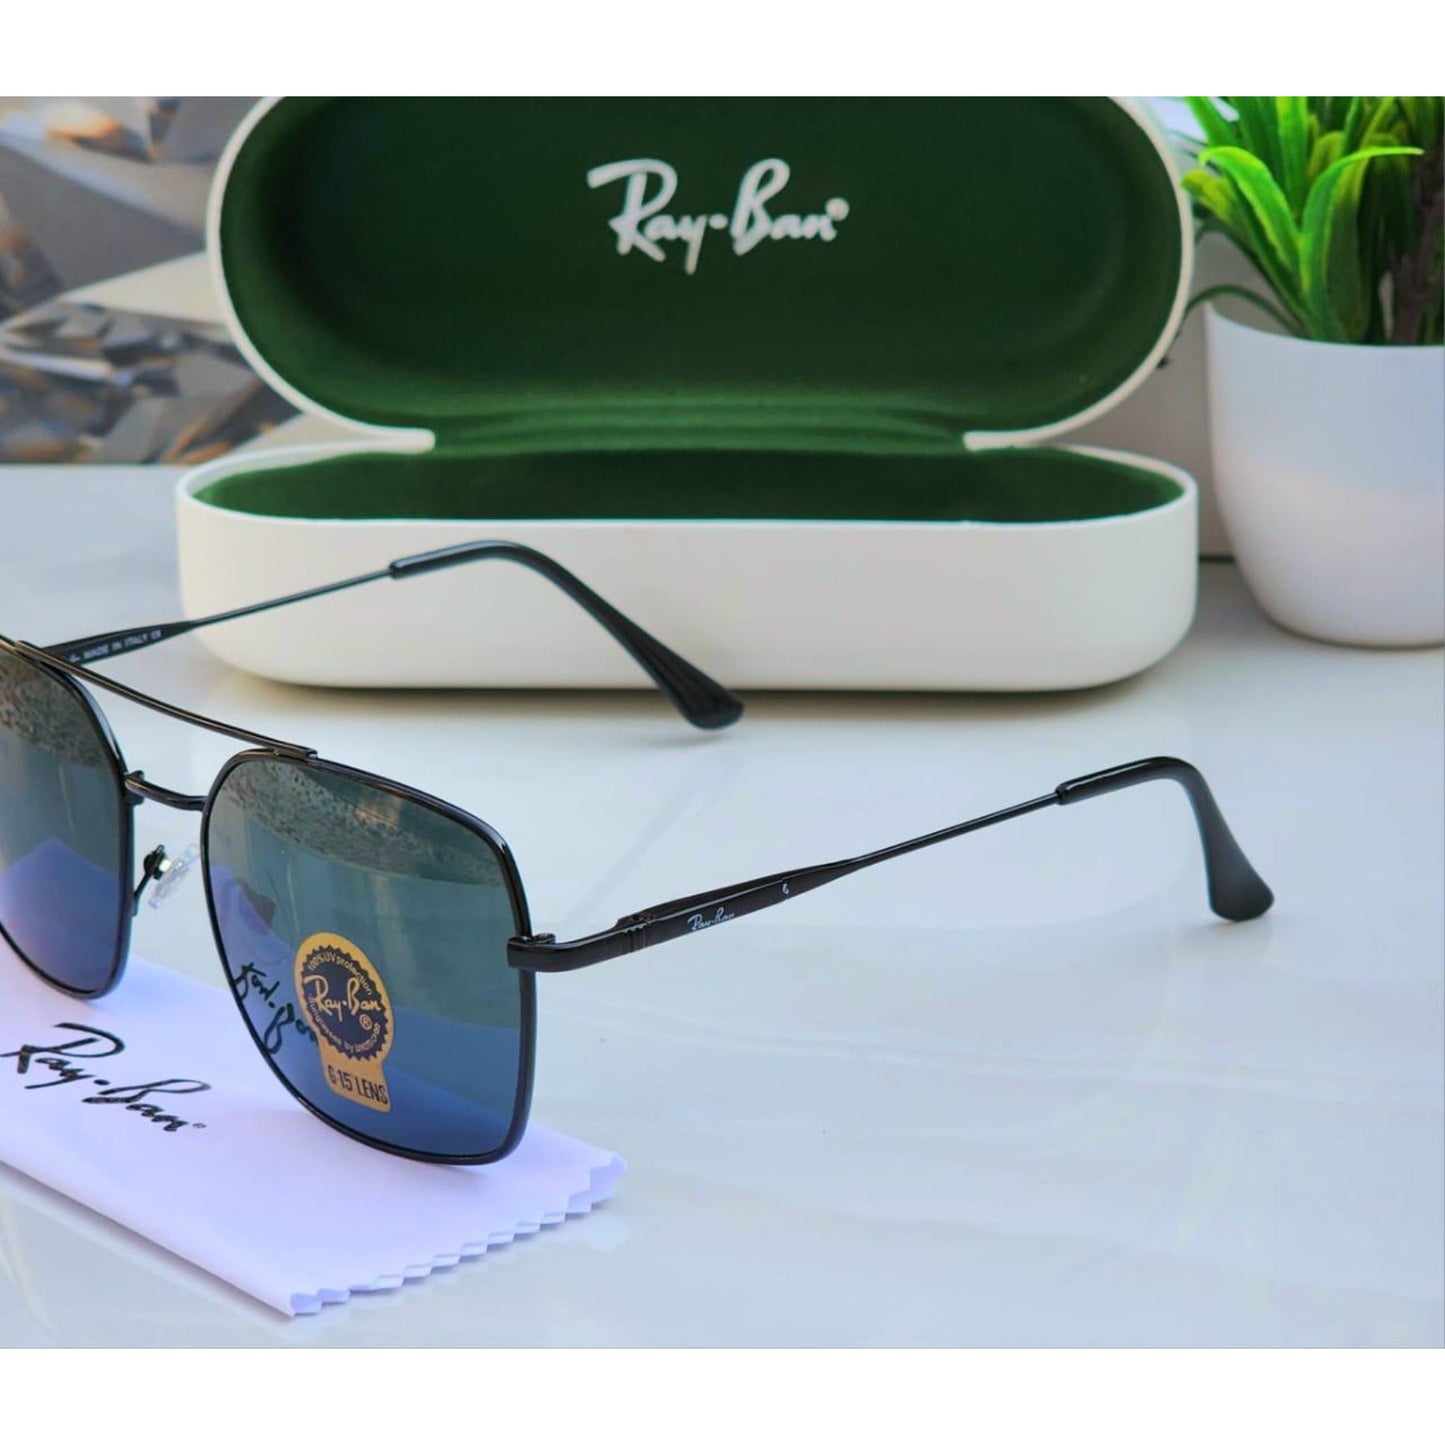 Ray-Ban Latest Fancy All Season Special RB Square 9712 Trending Hot Favorite Fashionable Sunglass For Unisex.